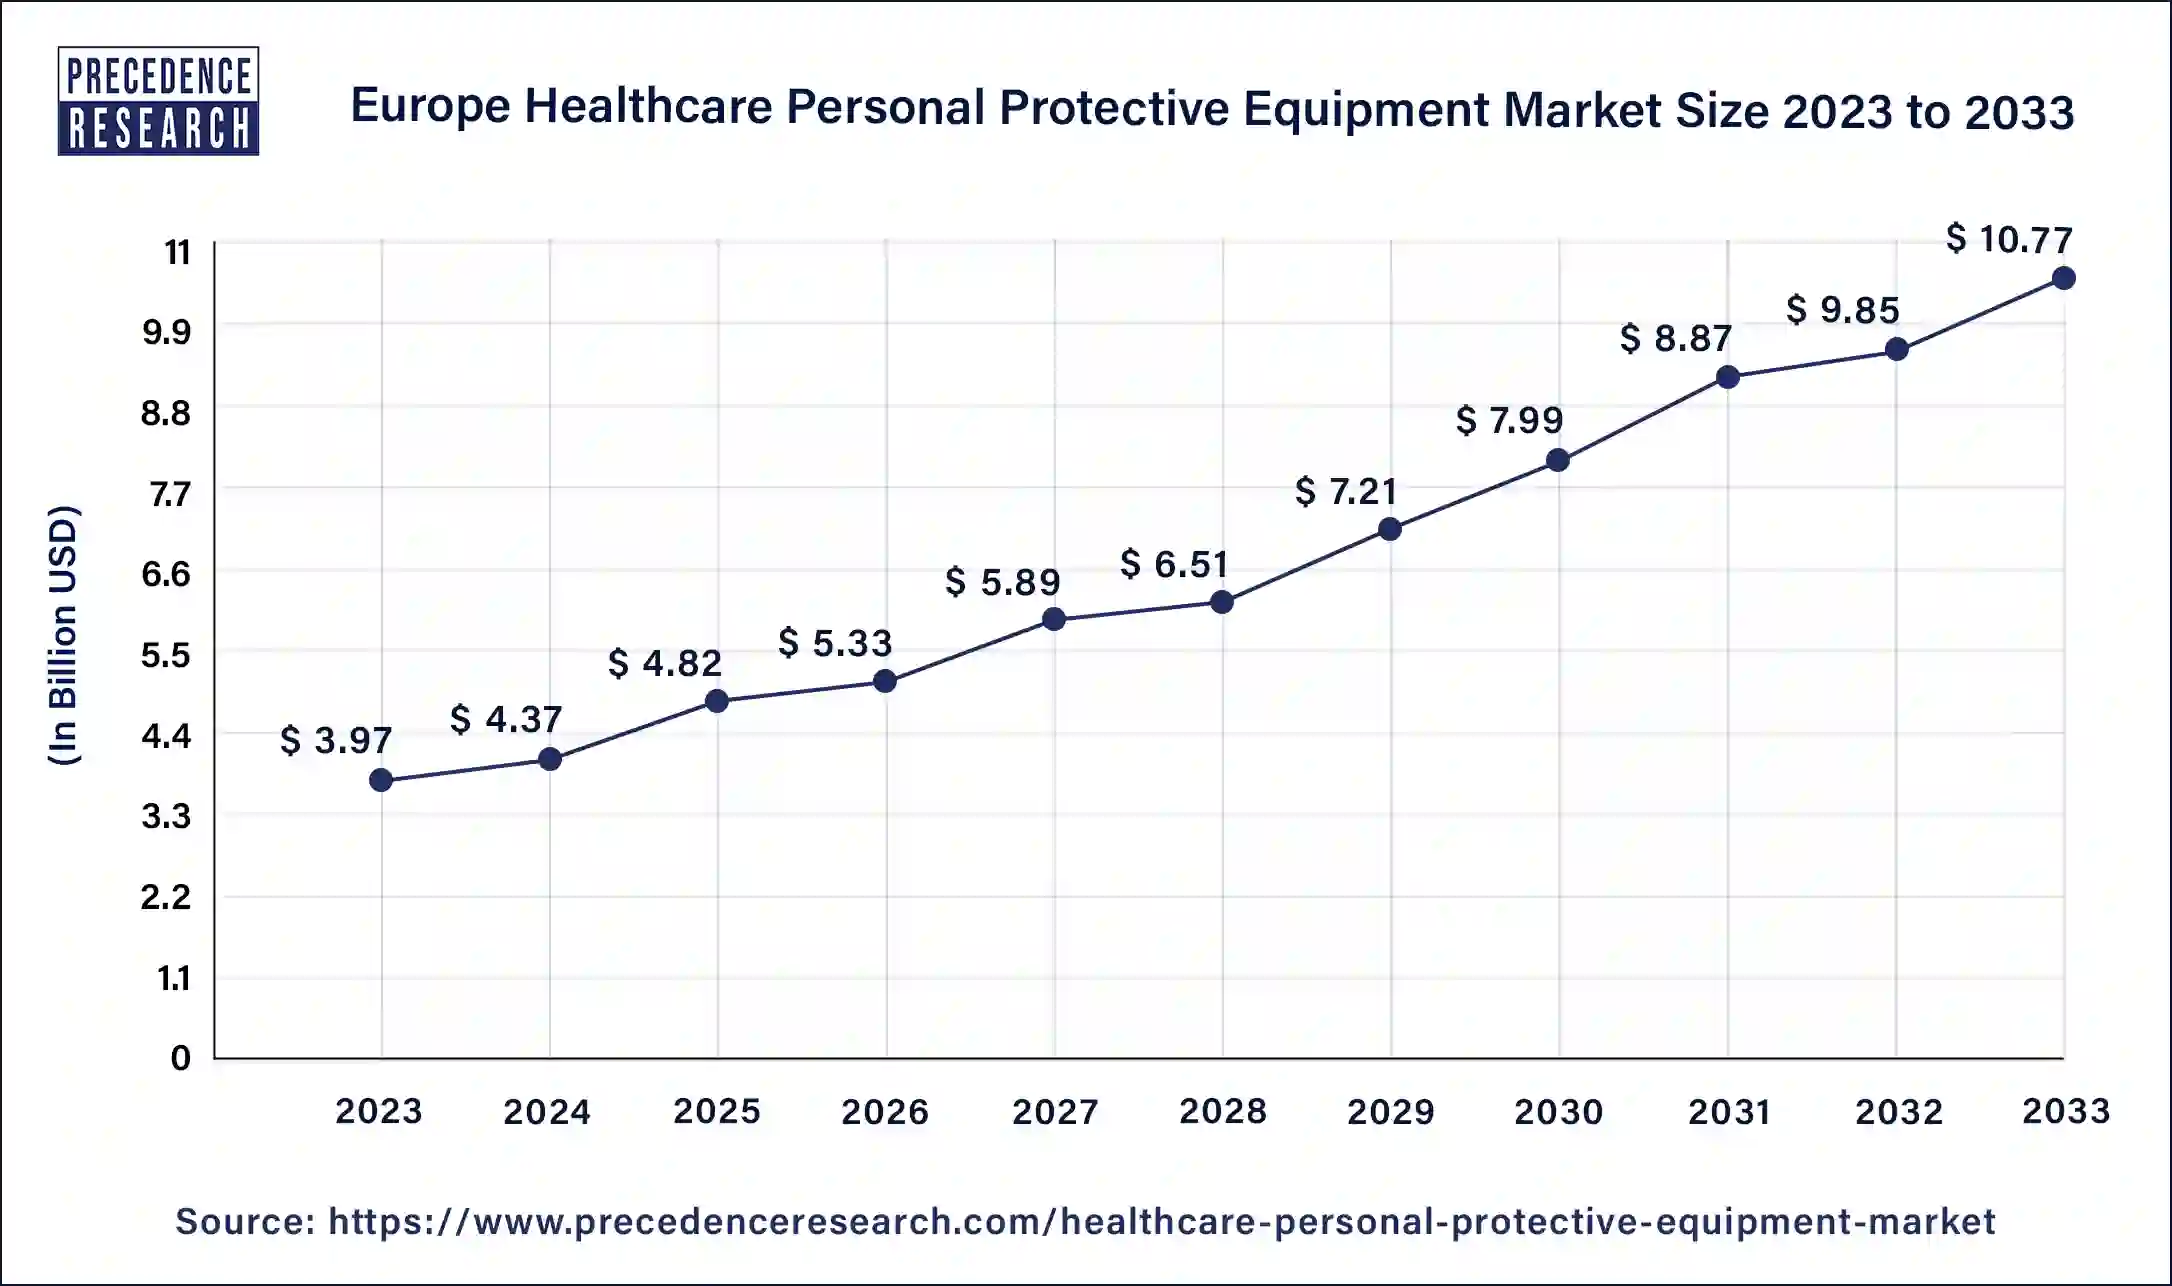 Europe Healthcare Personal Protective Equipment Market Size 2024 to 2033